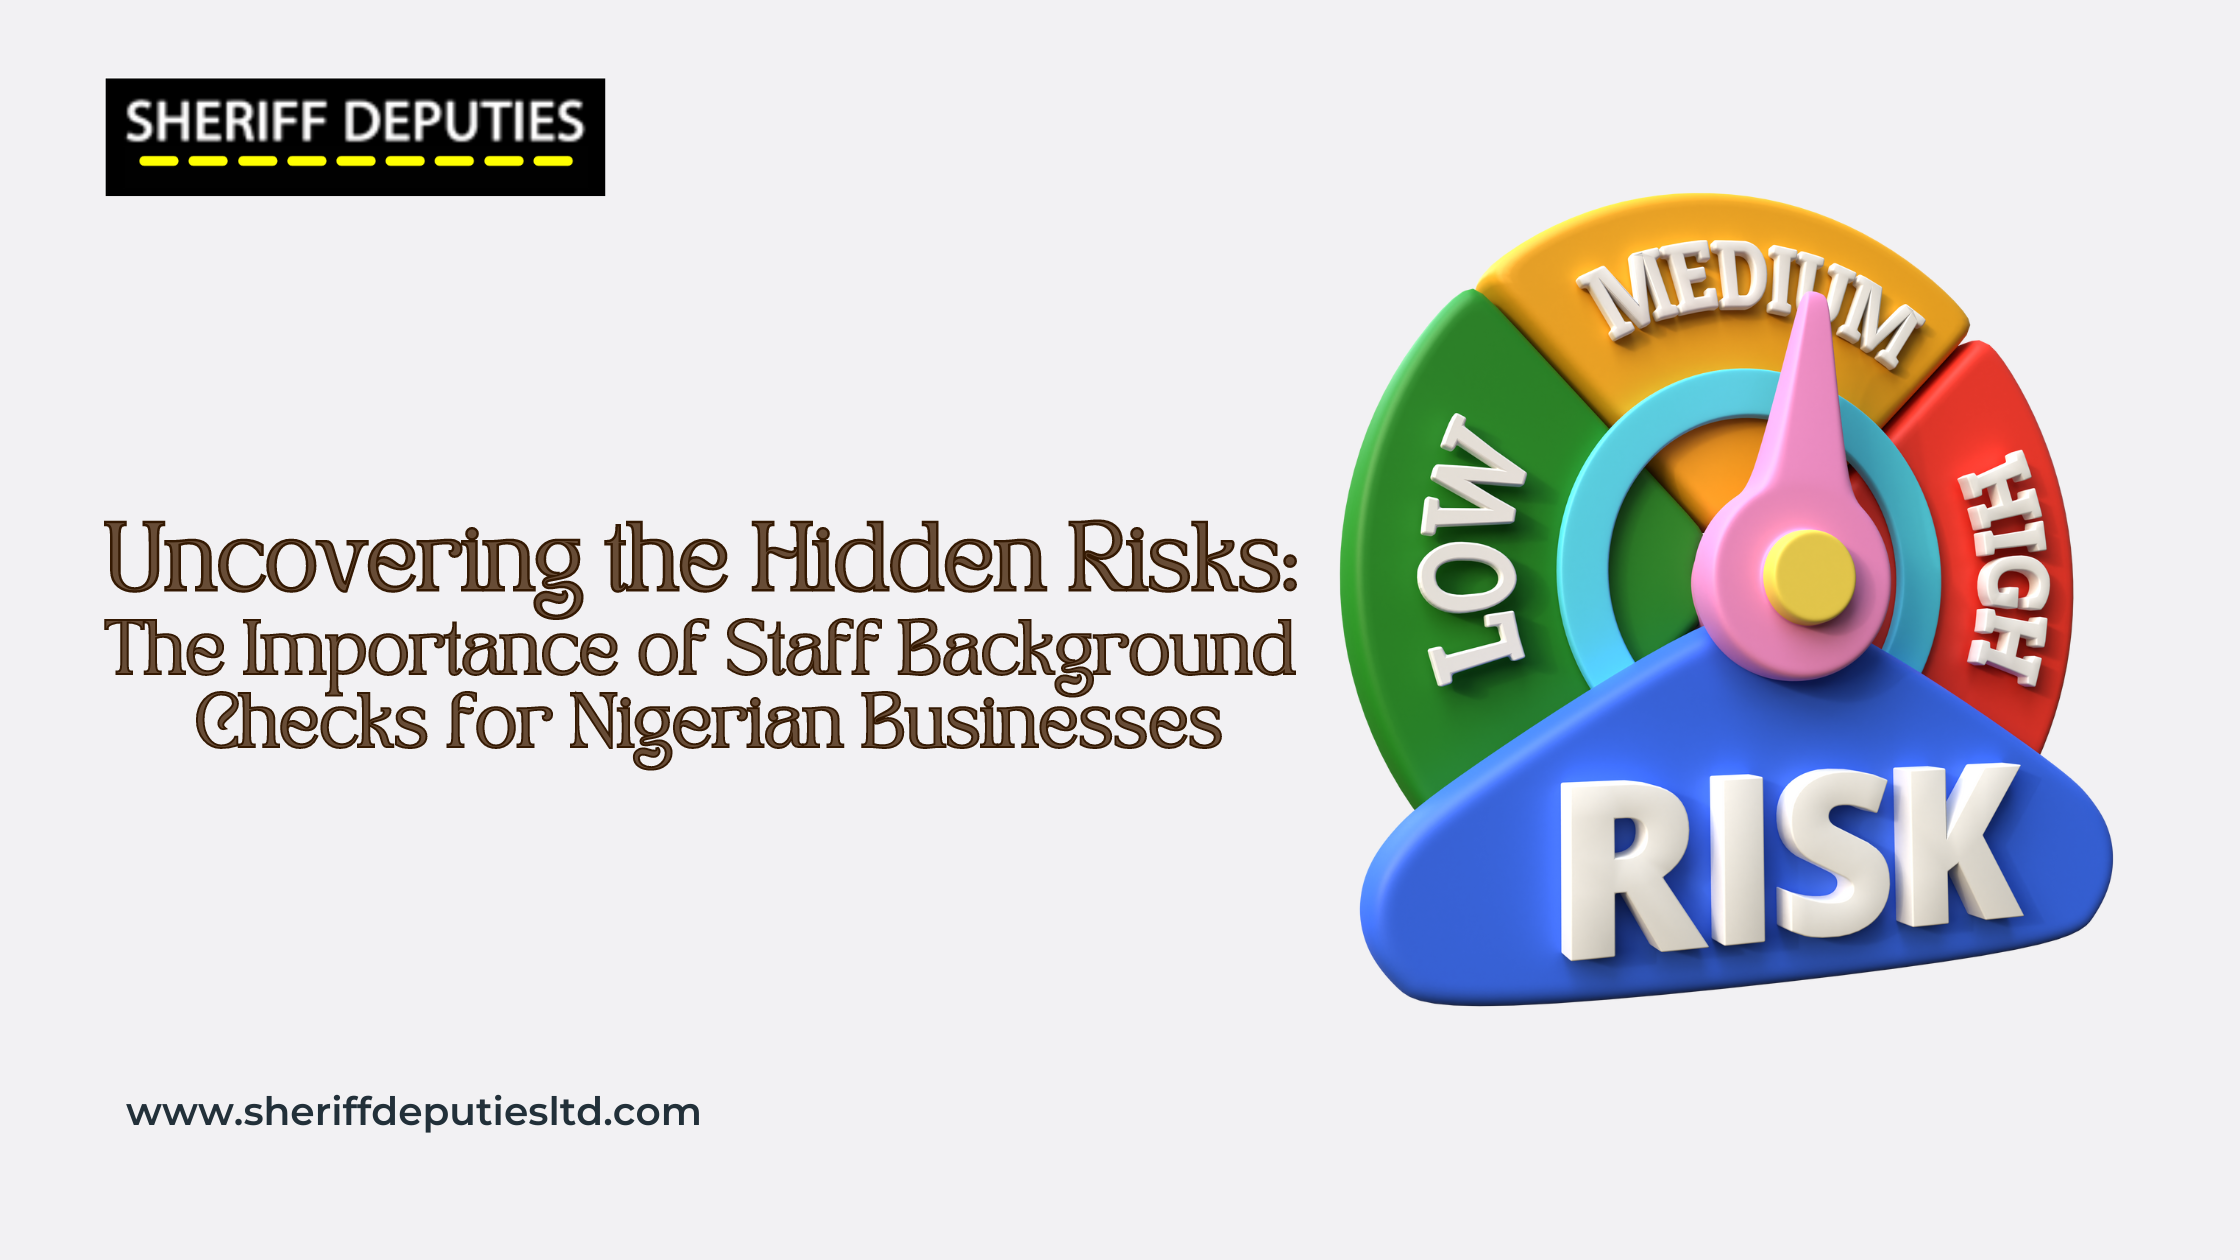 Uncovering the Hidden Risks: The Importance of Staff Background Checks for Nigerian Businesses